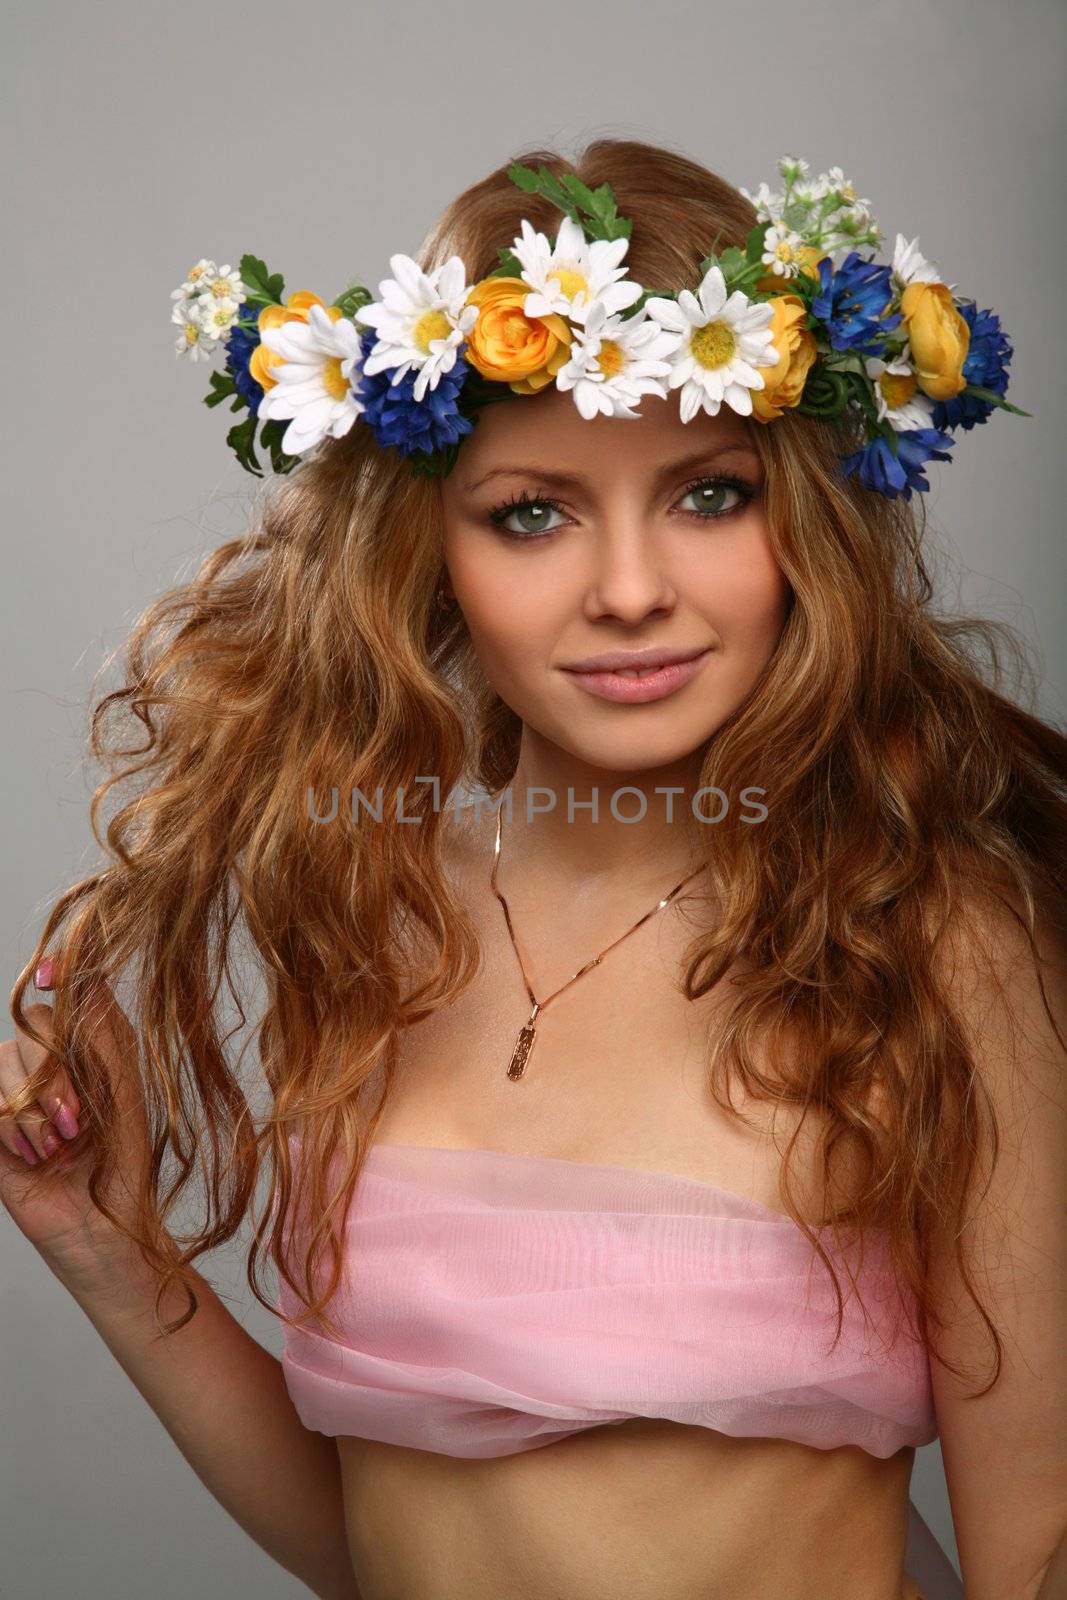 girl with wreath of flowers on her head by skutin